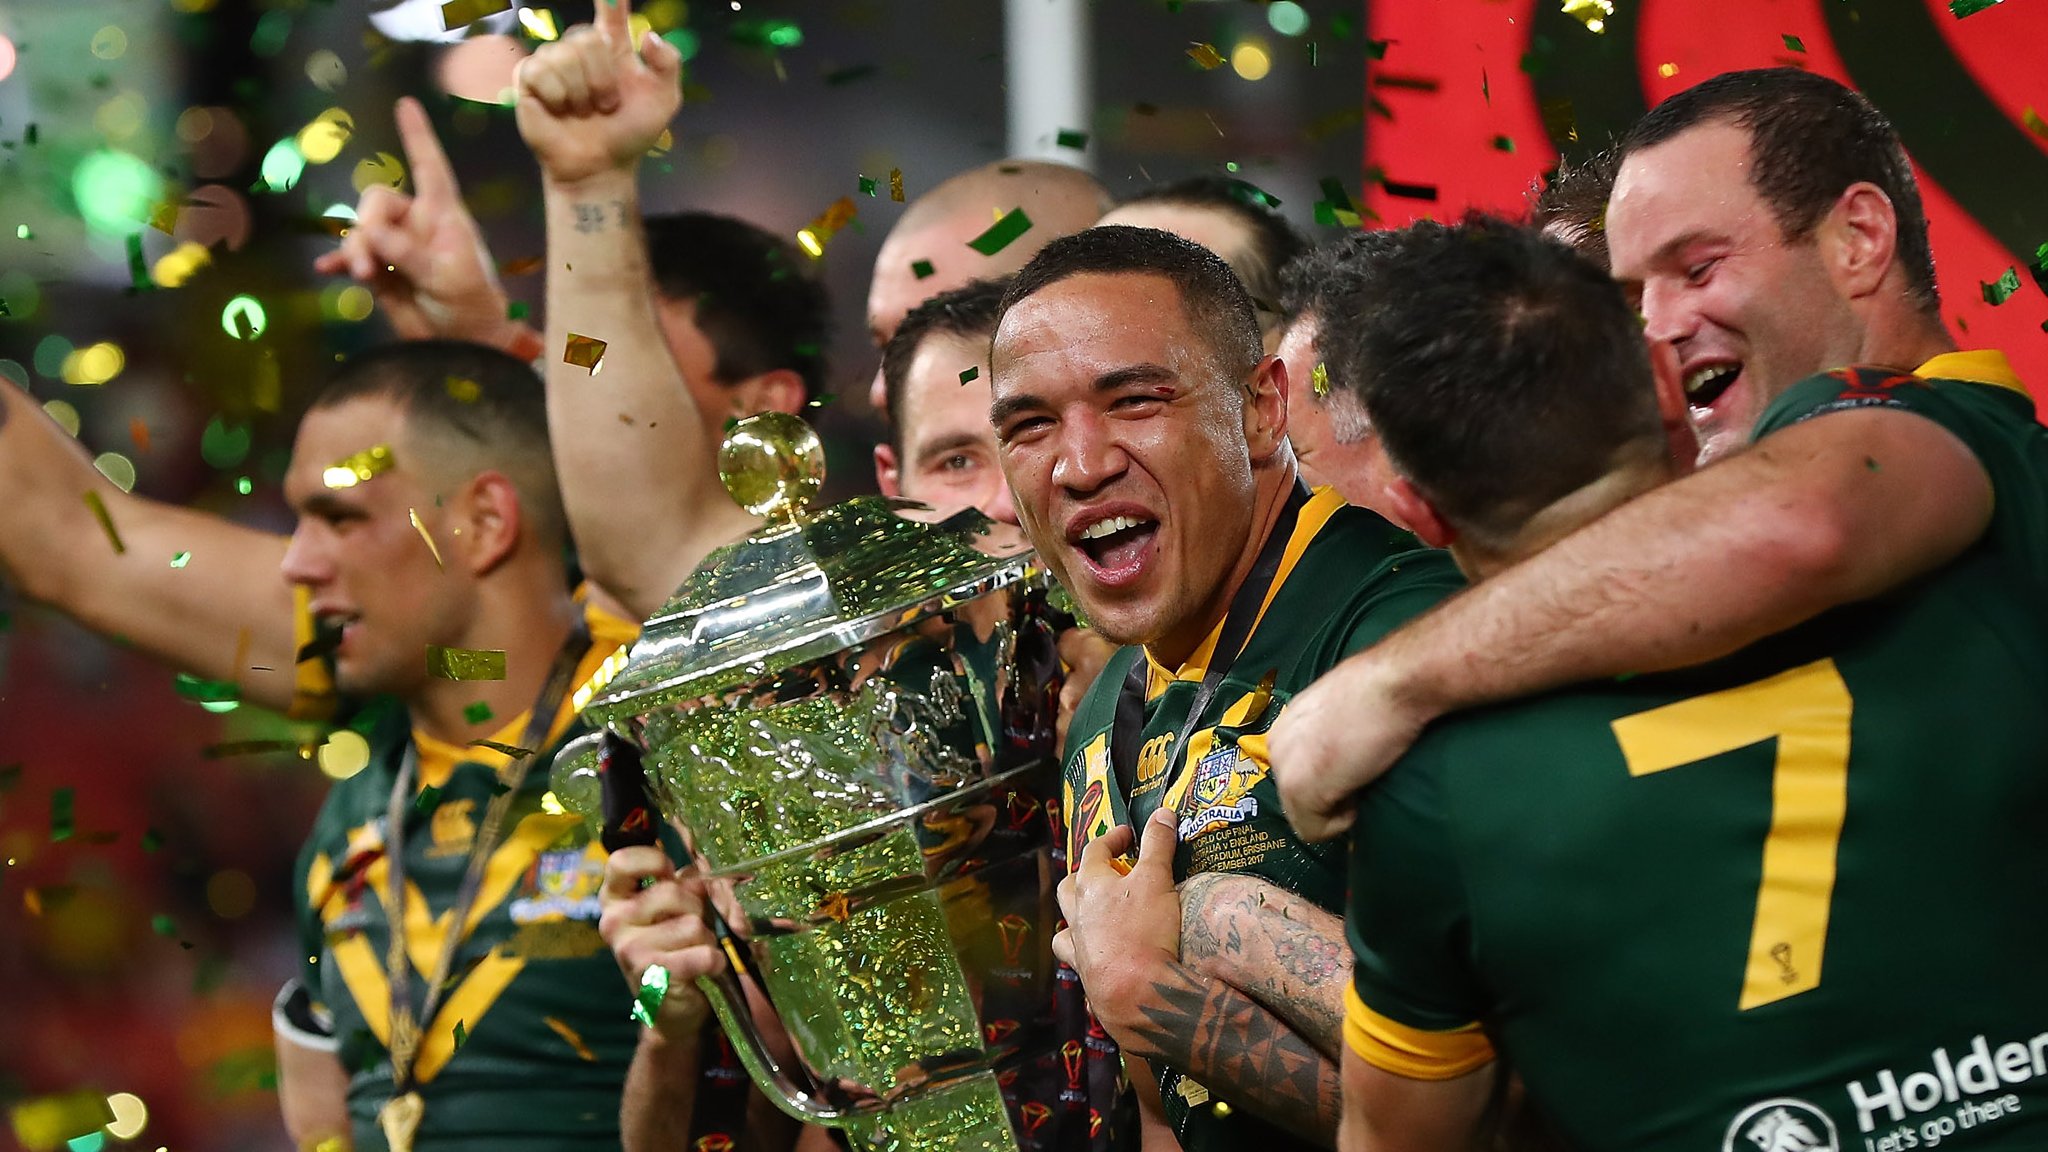 Rugby League World Cup: Australia and New Zealand pull out of tournament